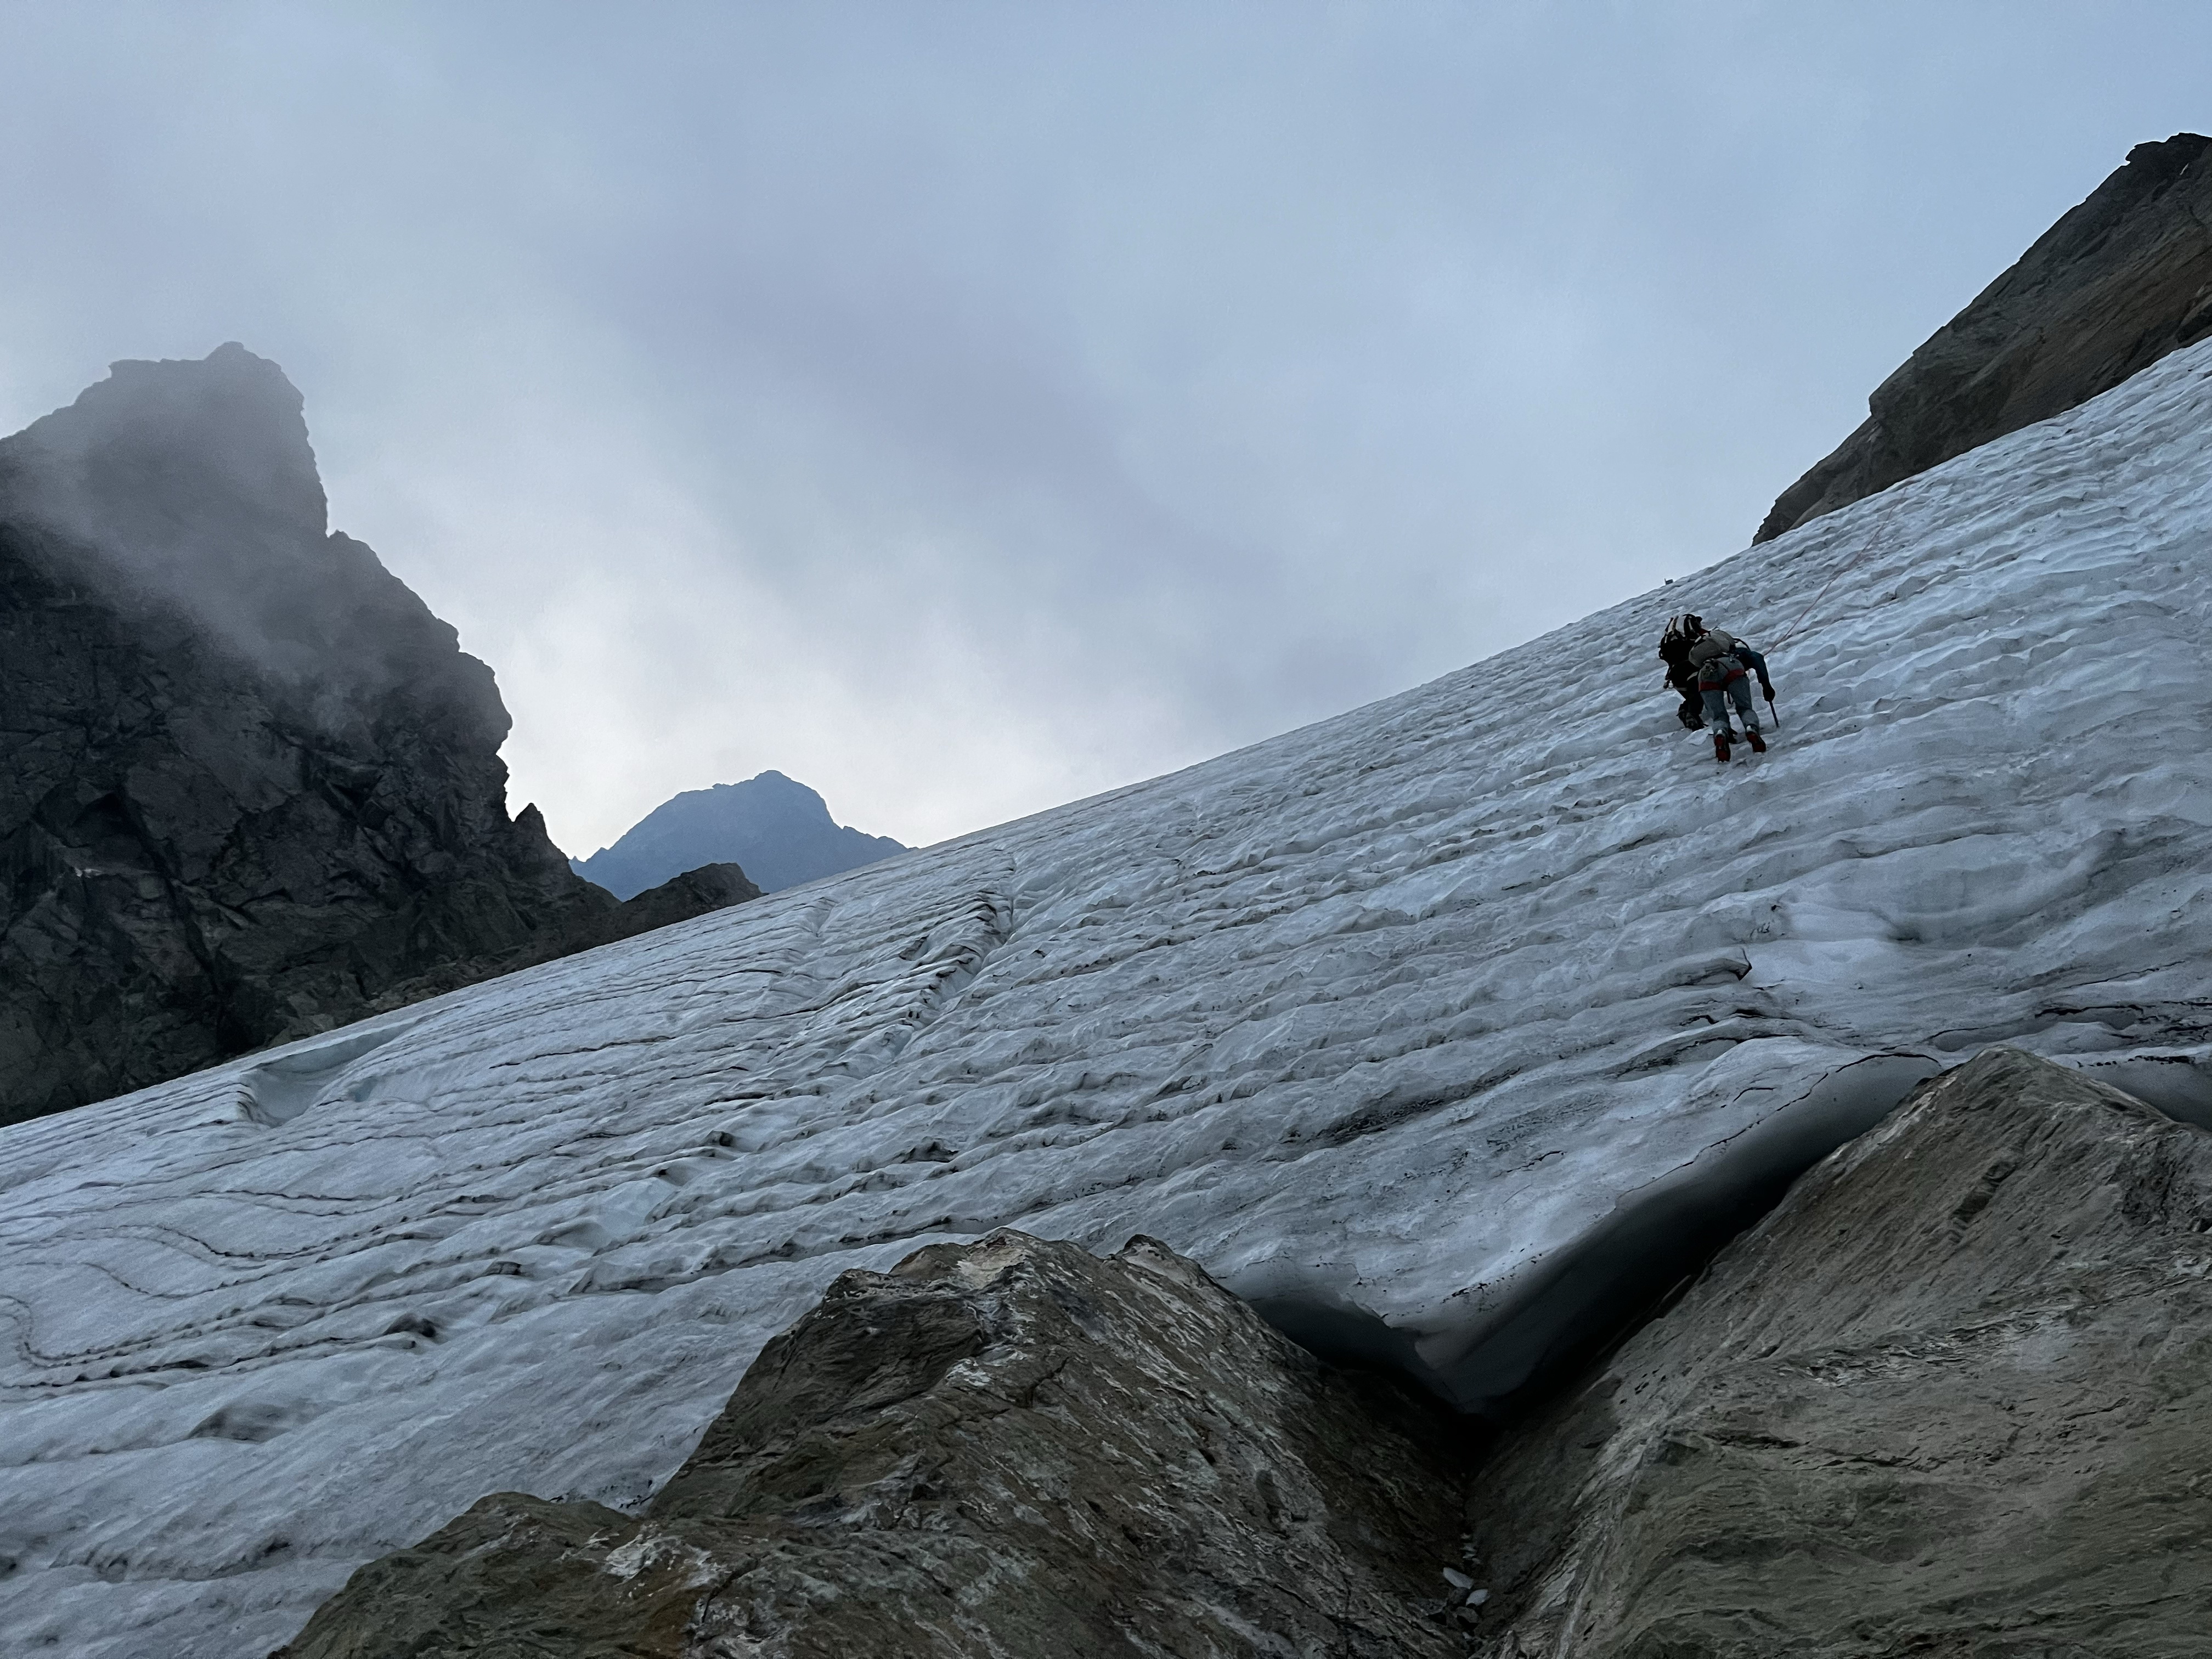 Two figures climbing low-angle glacier ice, pictured from below (butt shot).